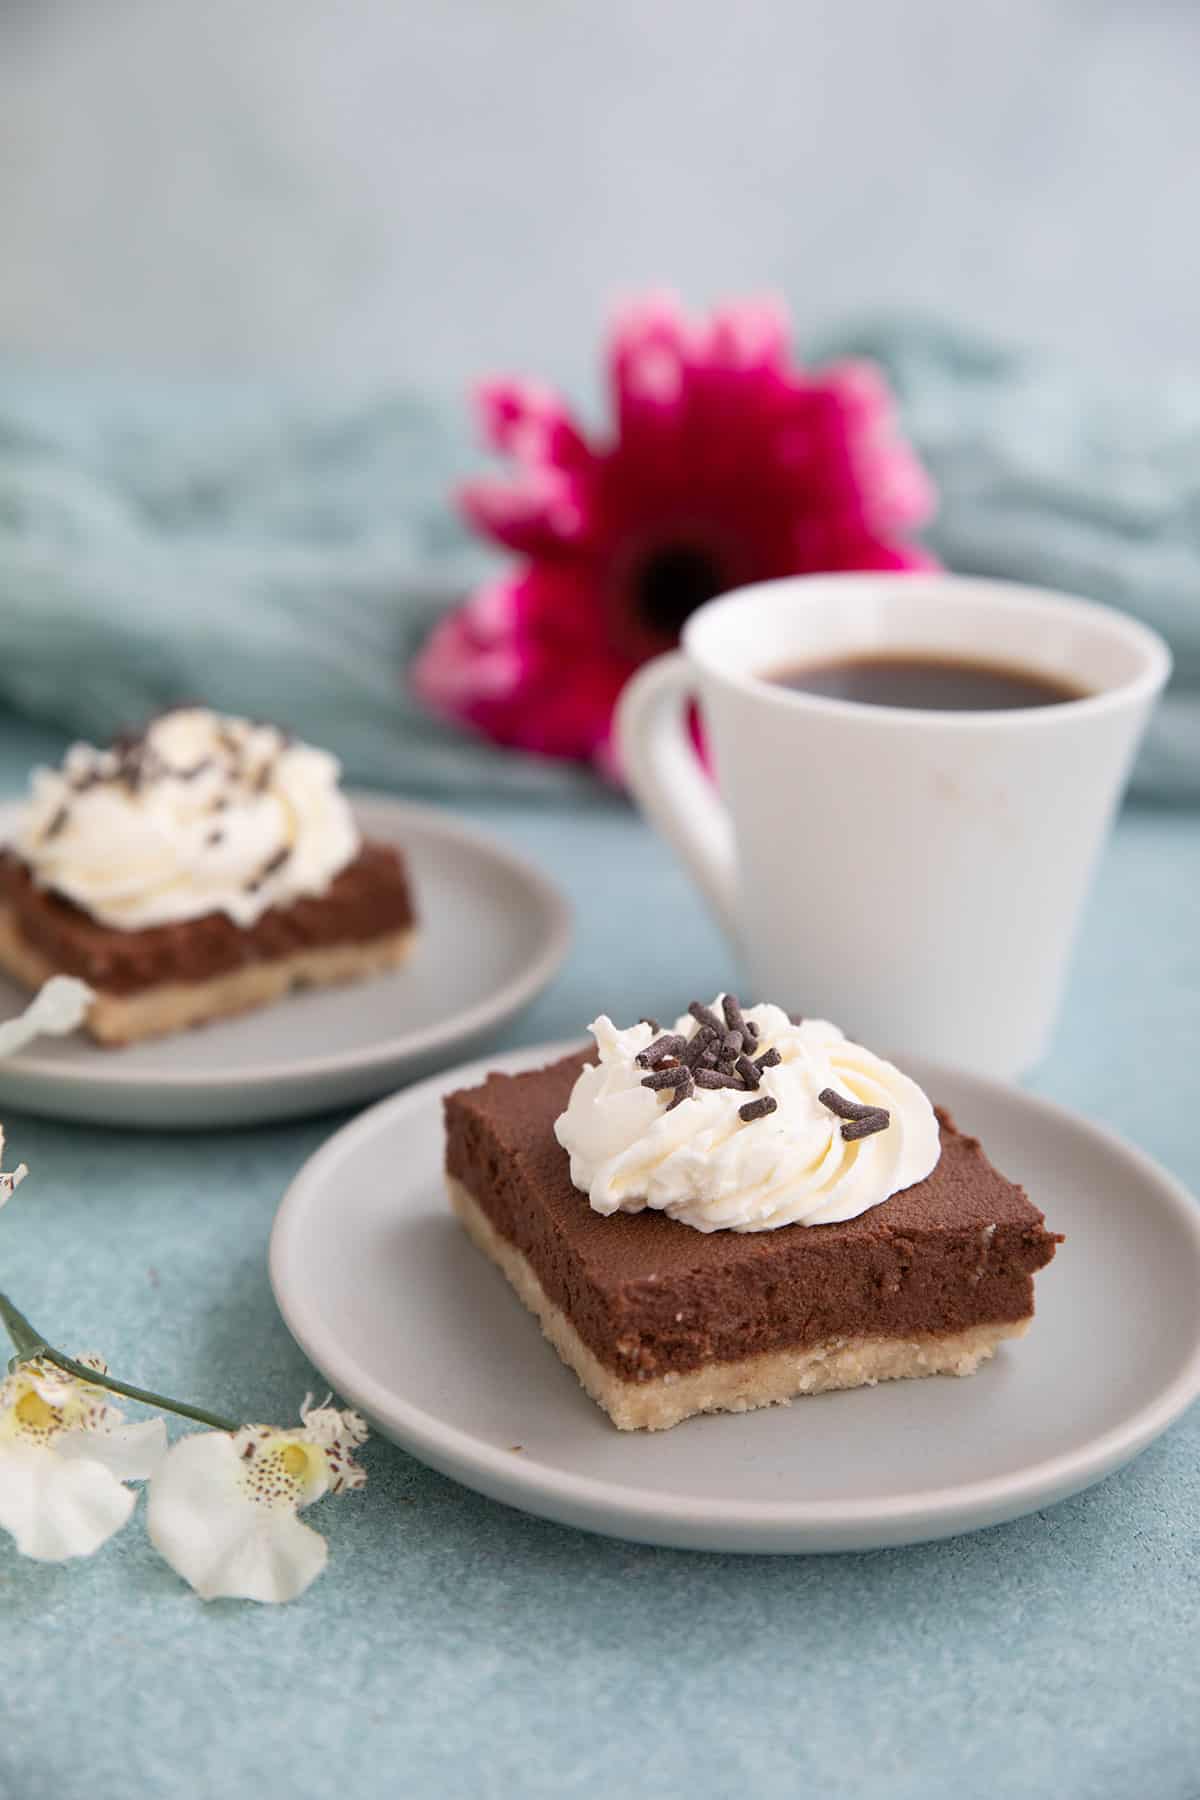 Two Keto French Silk Pie Bars on gray dessert plates with a cup of coffee.